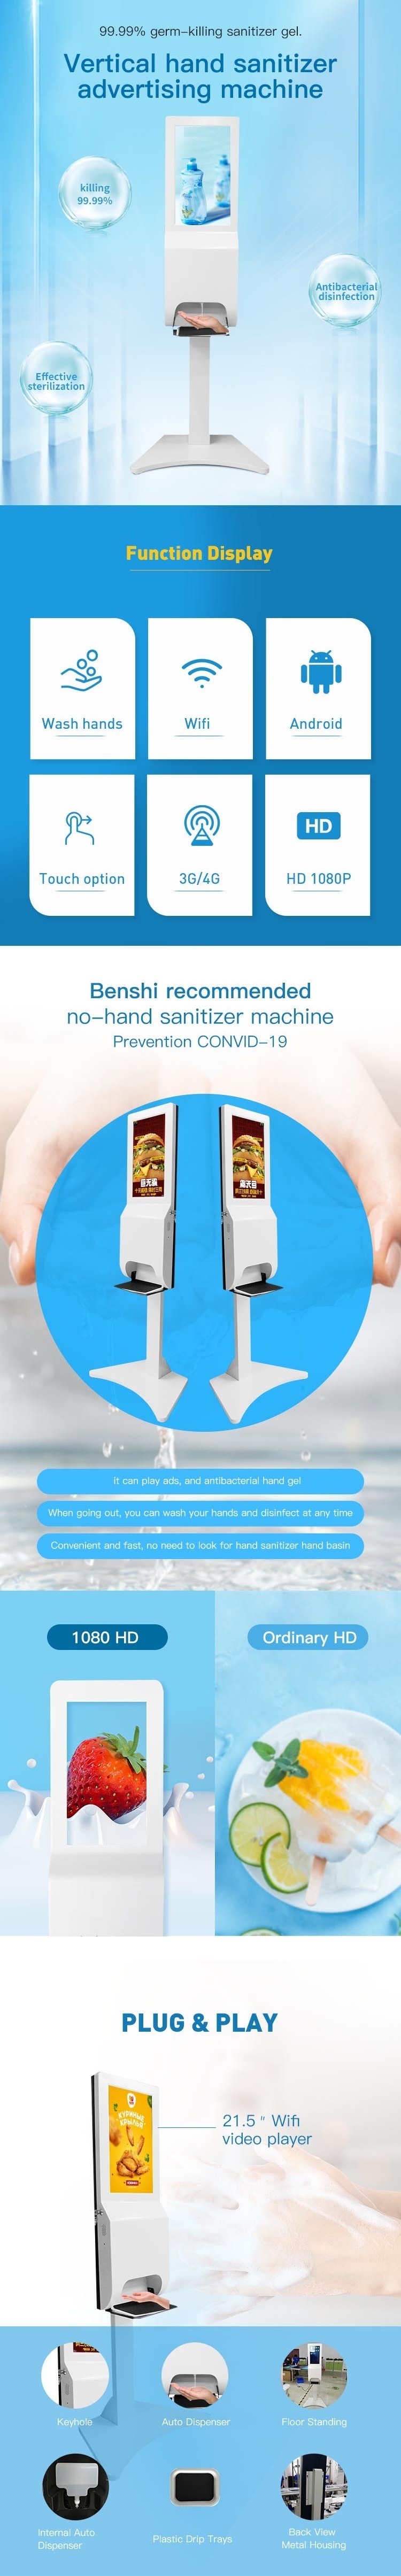 21.5 Inch Android Digital Signage LCD Advertising Display Internet Ad Player Automatic Hand Sanitizer Dispenser Kiosk